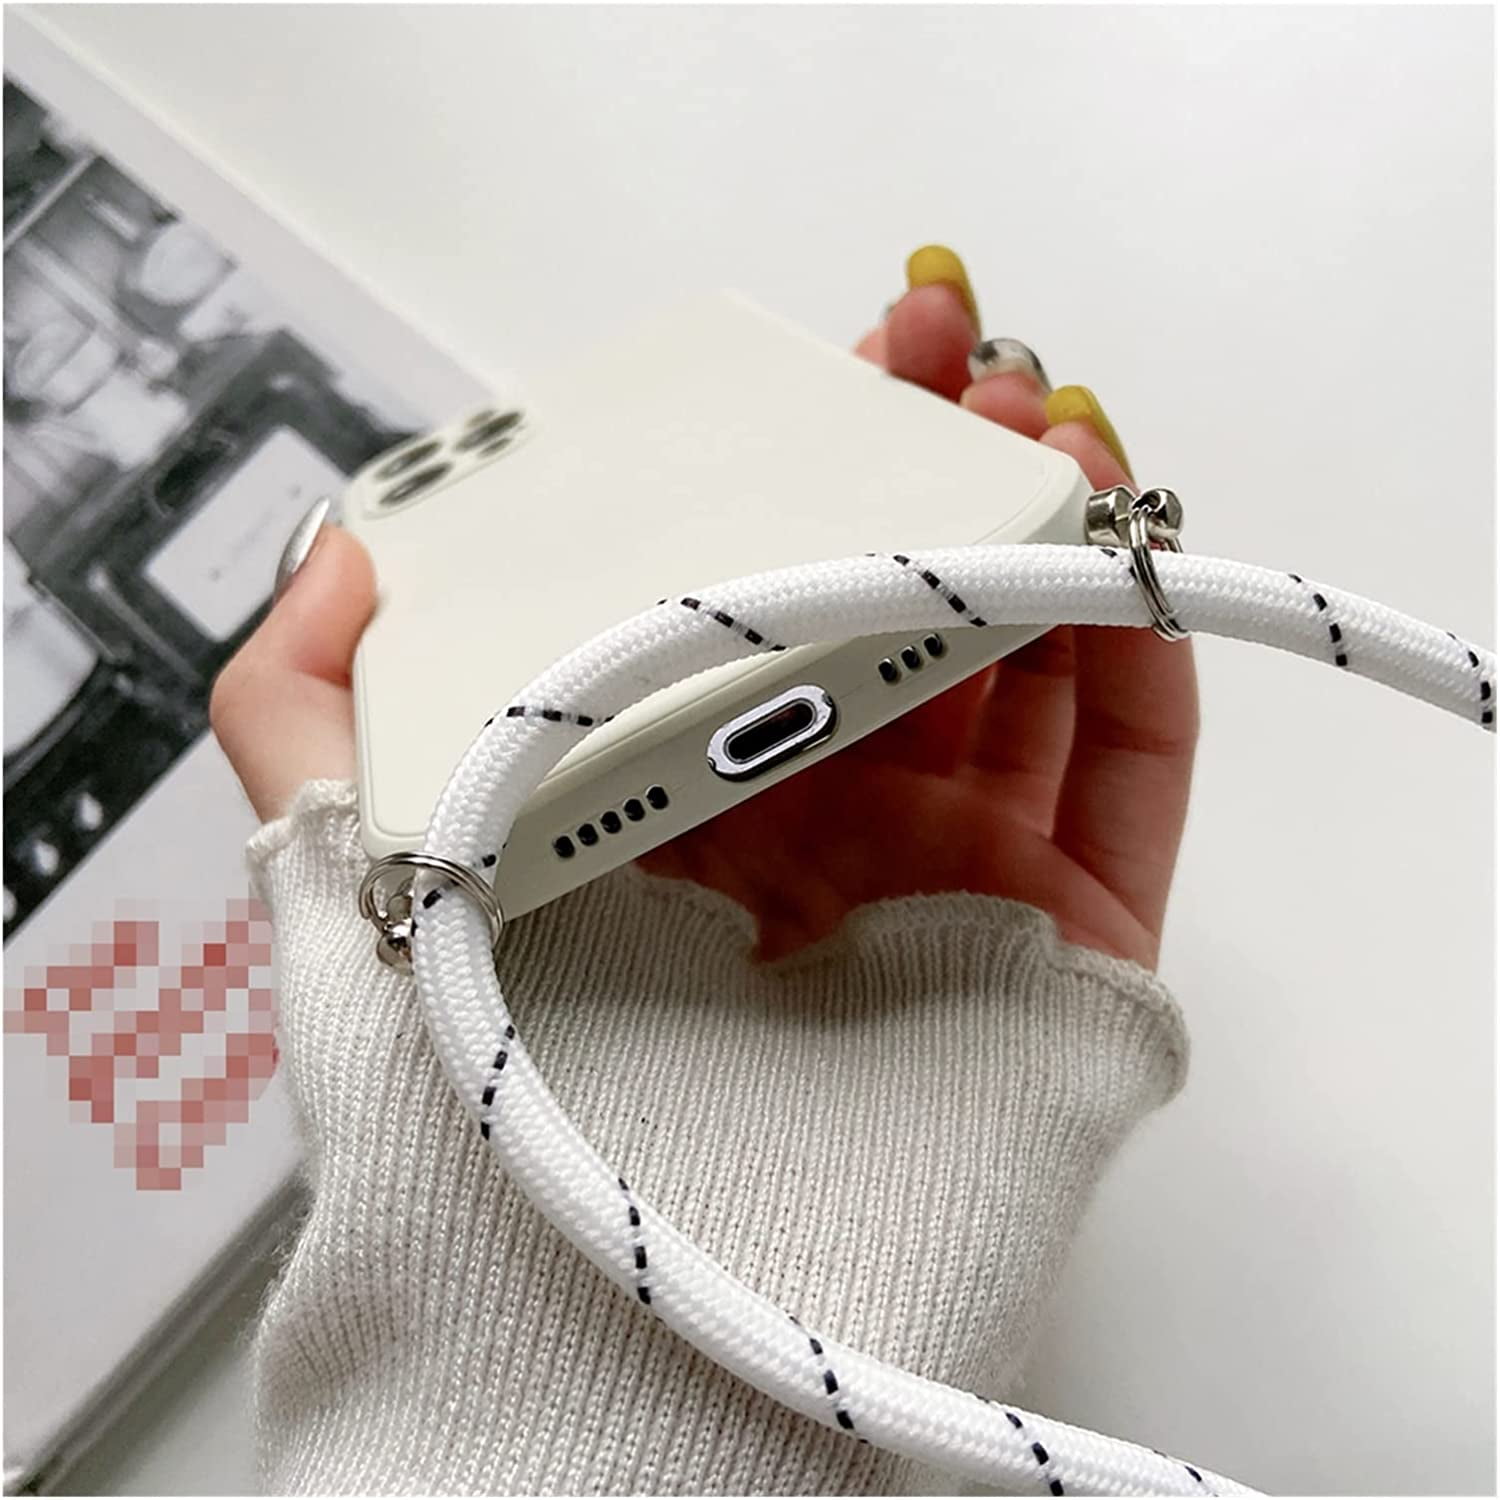 Slot Case for iPhone 11 12 13 PRO Max Se X Xr Xs Max 7 8 Plus Crossbody  Strap Phone Bag Cover Holder4.8 - China Phone Case and Silicone Liquid Phone  Case